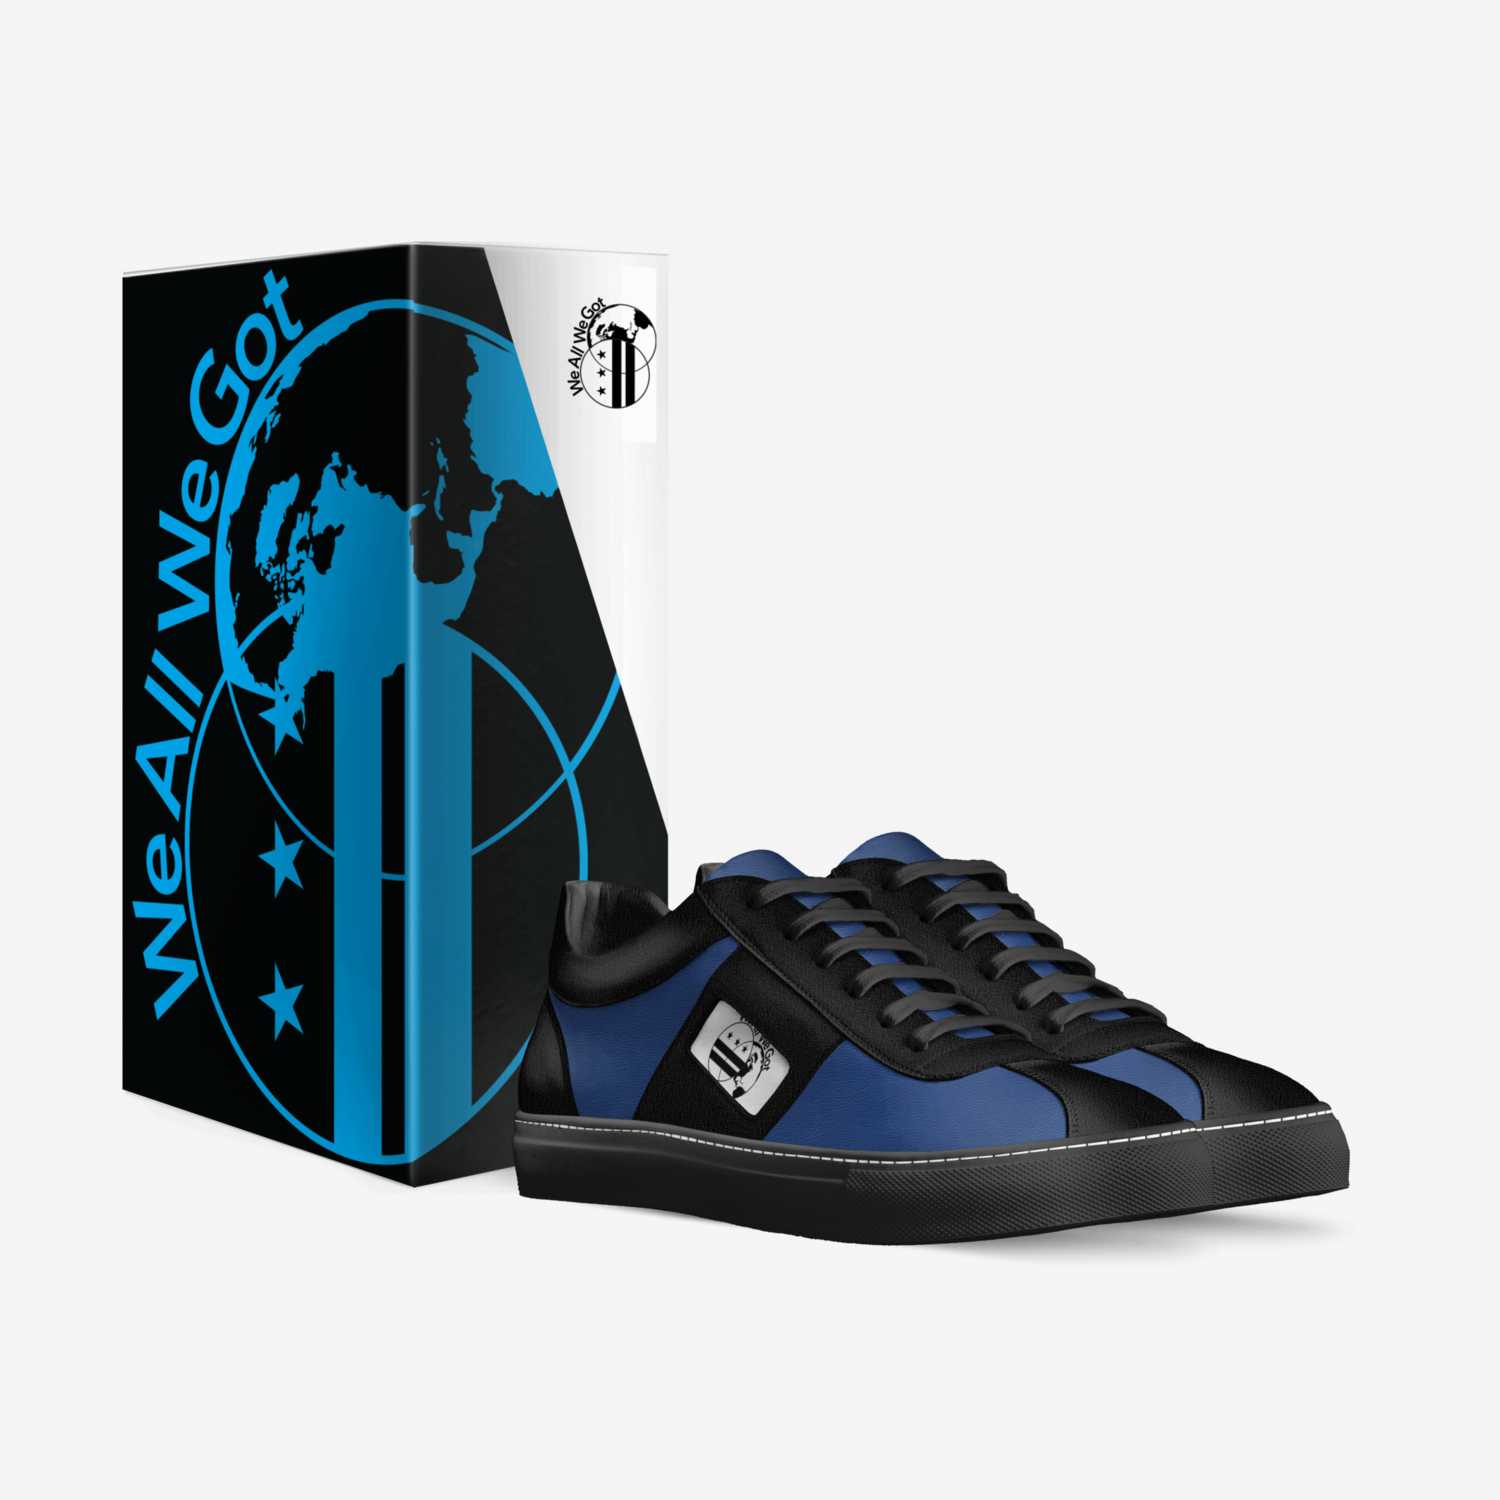 Black&Bleus custom made in Italy shoes by We All We Got Attire | Box view